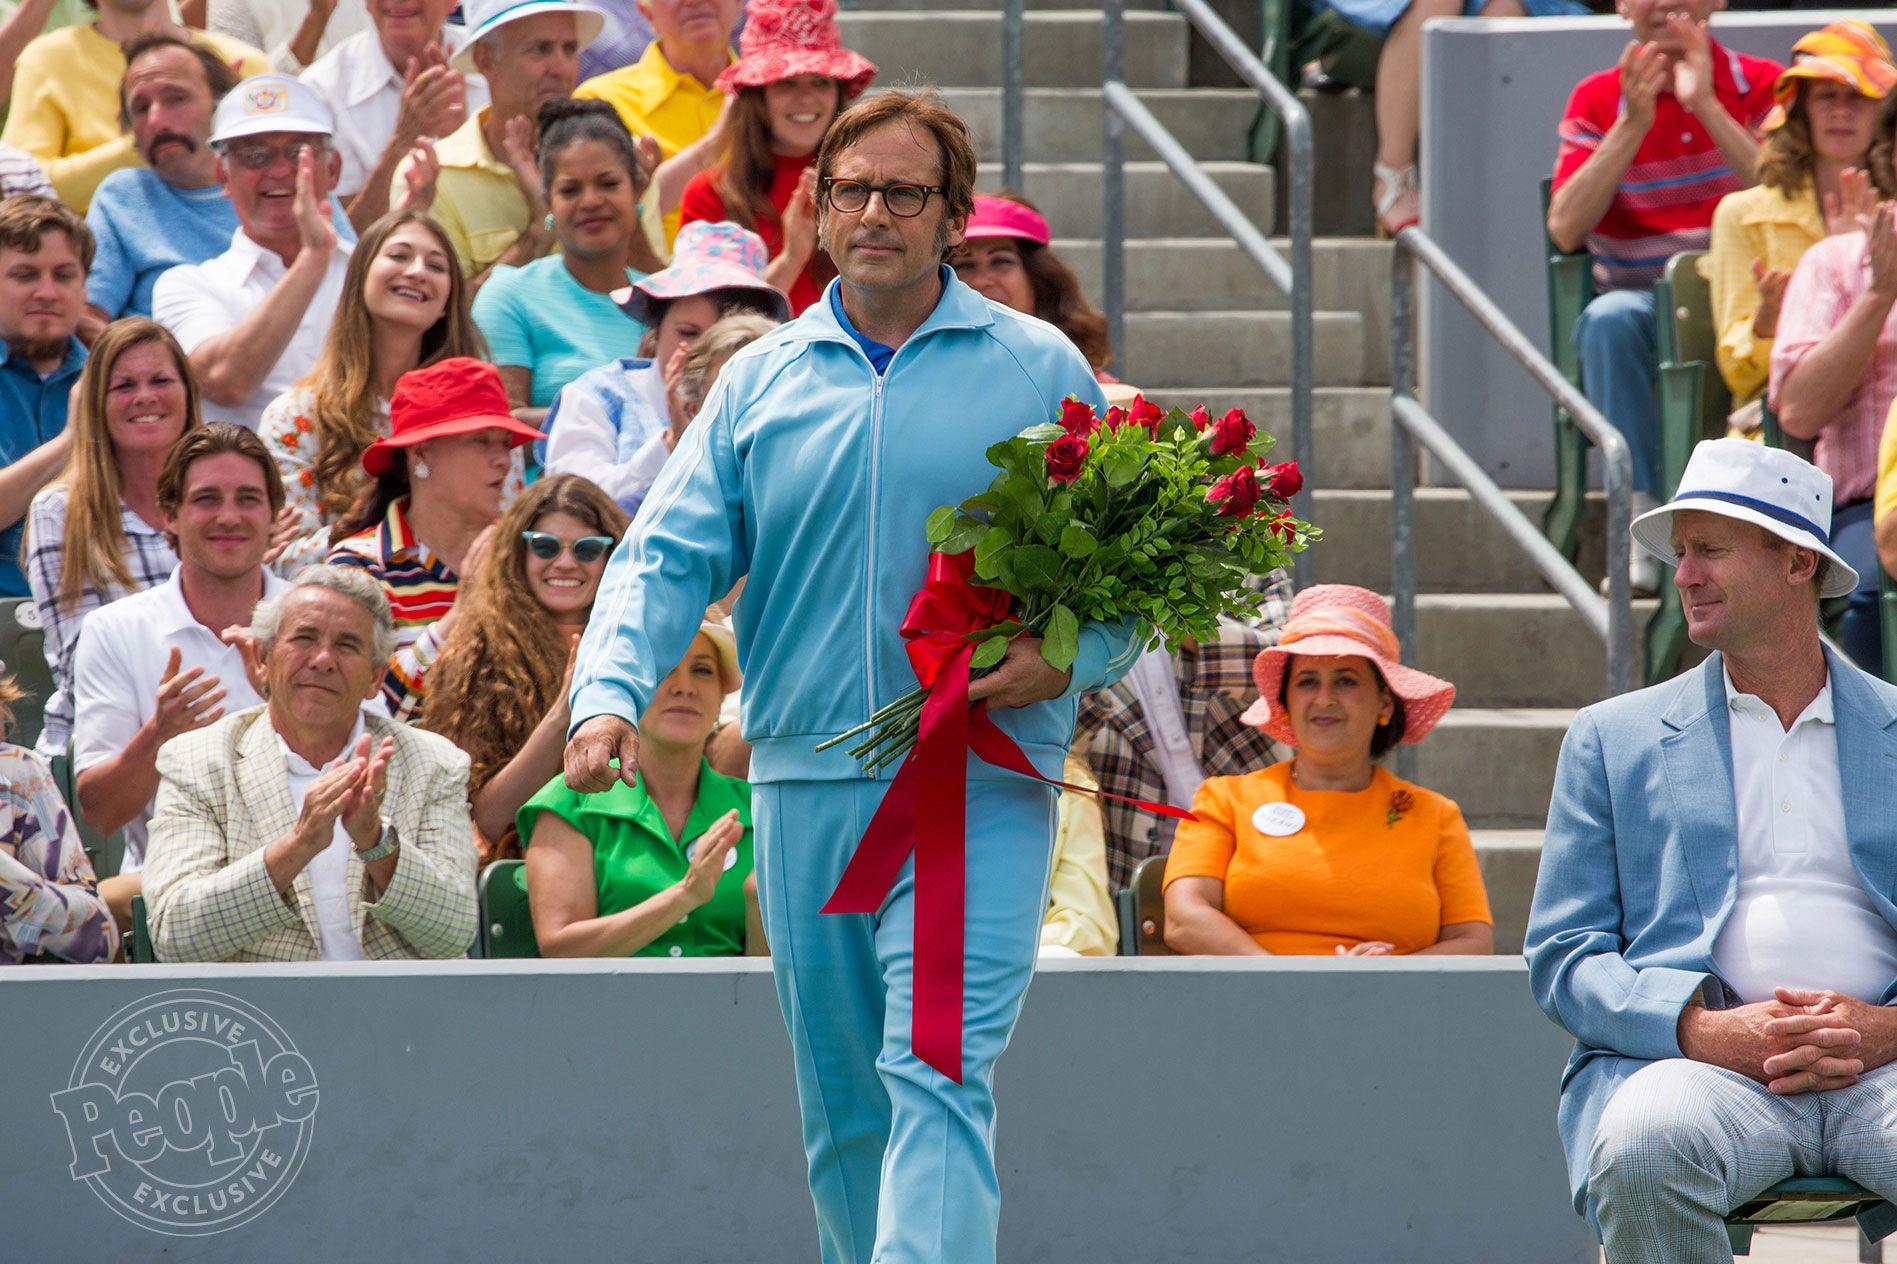 Steve Carell & Emma Stone are ready for tennis in Battle